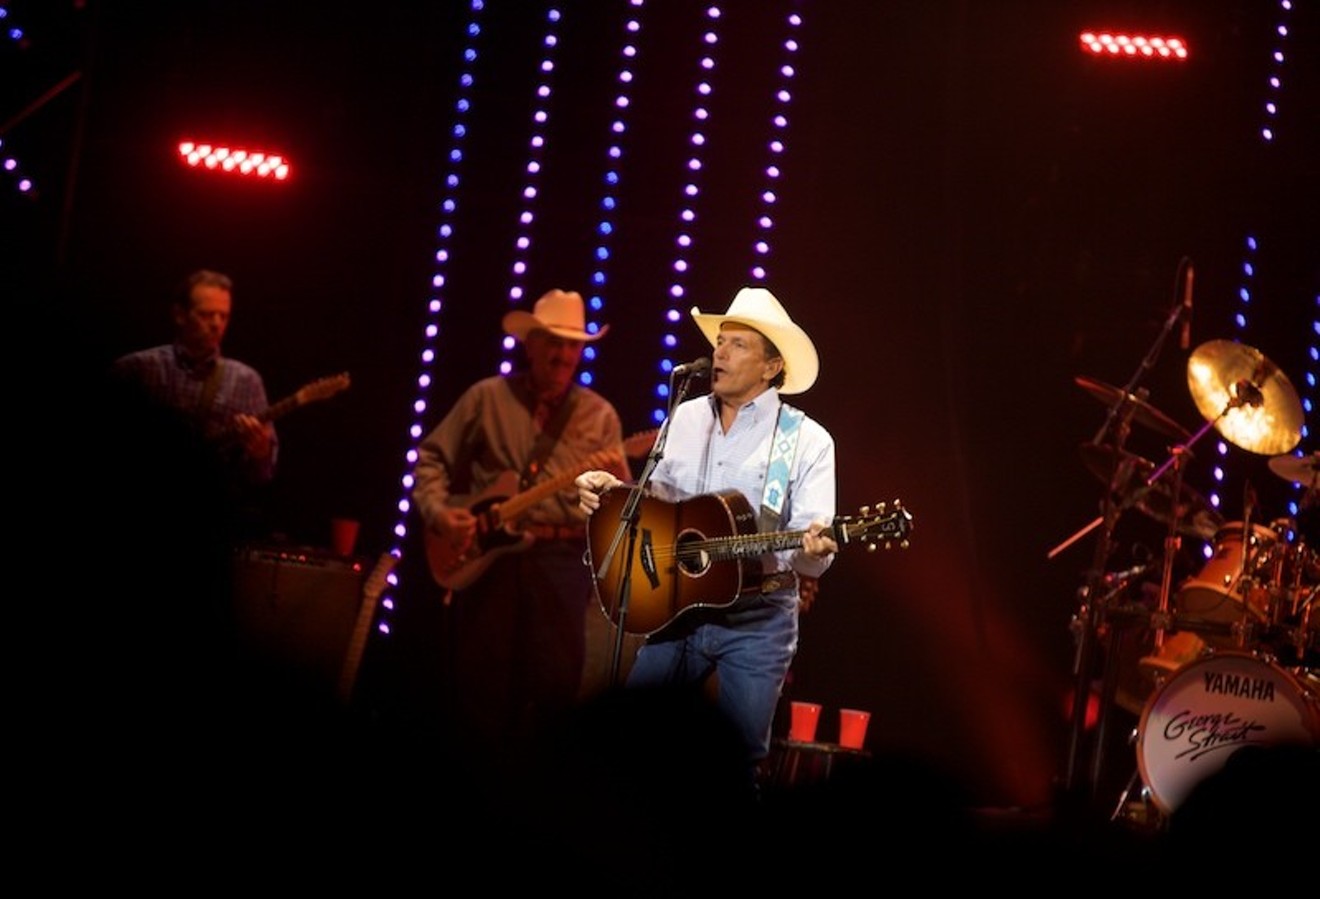 George Strait adds a second show for Fort Worth.